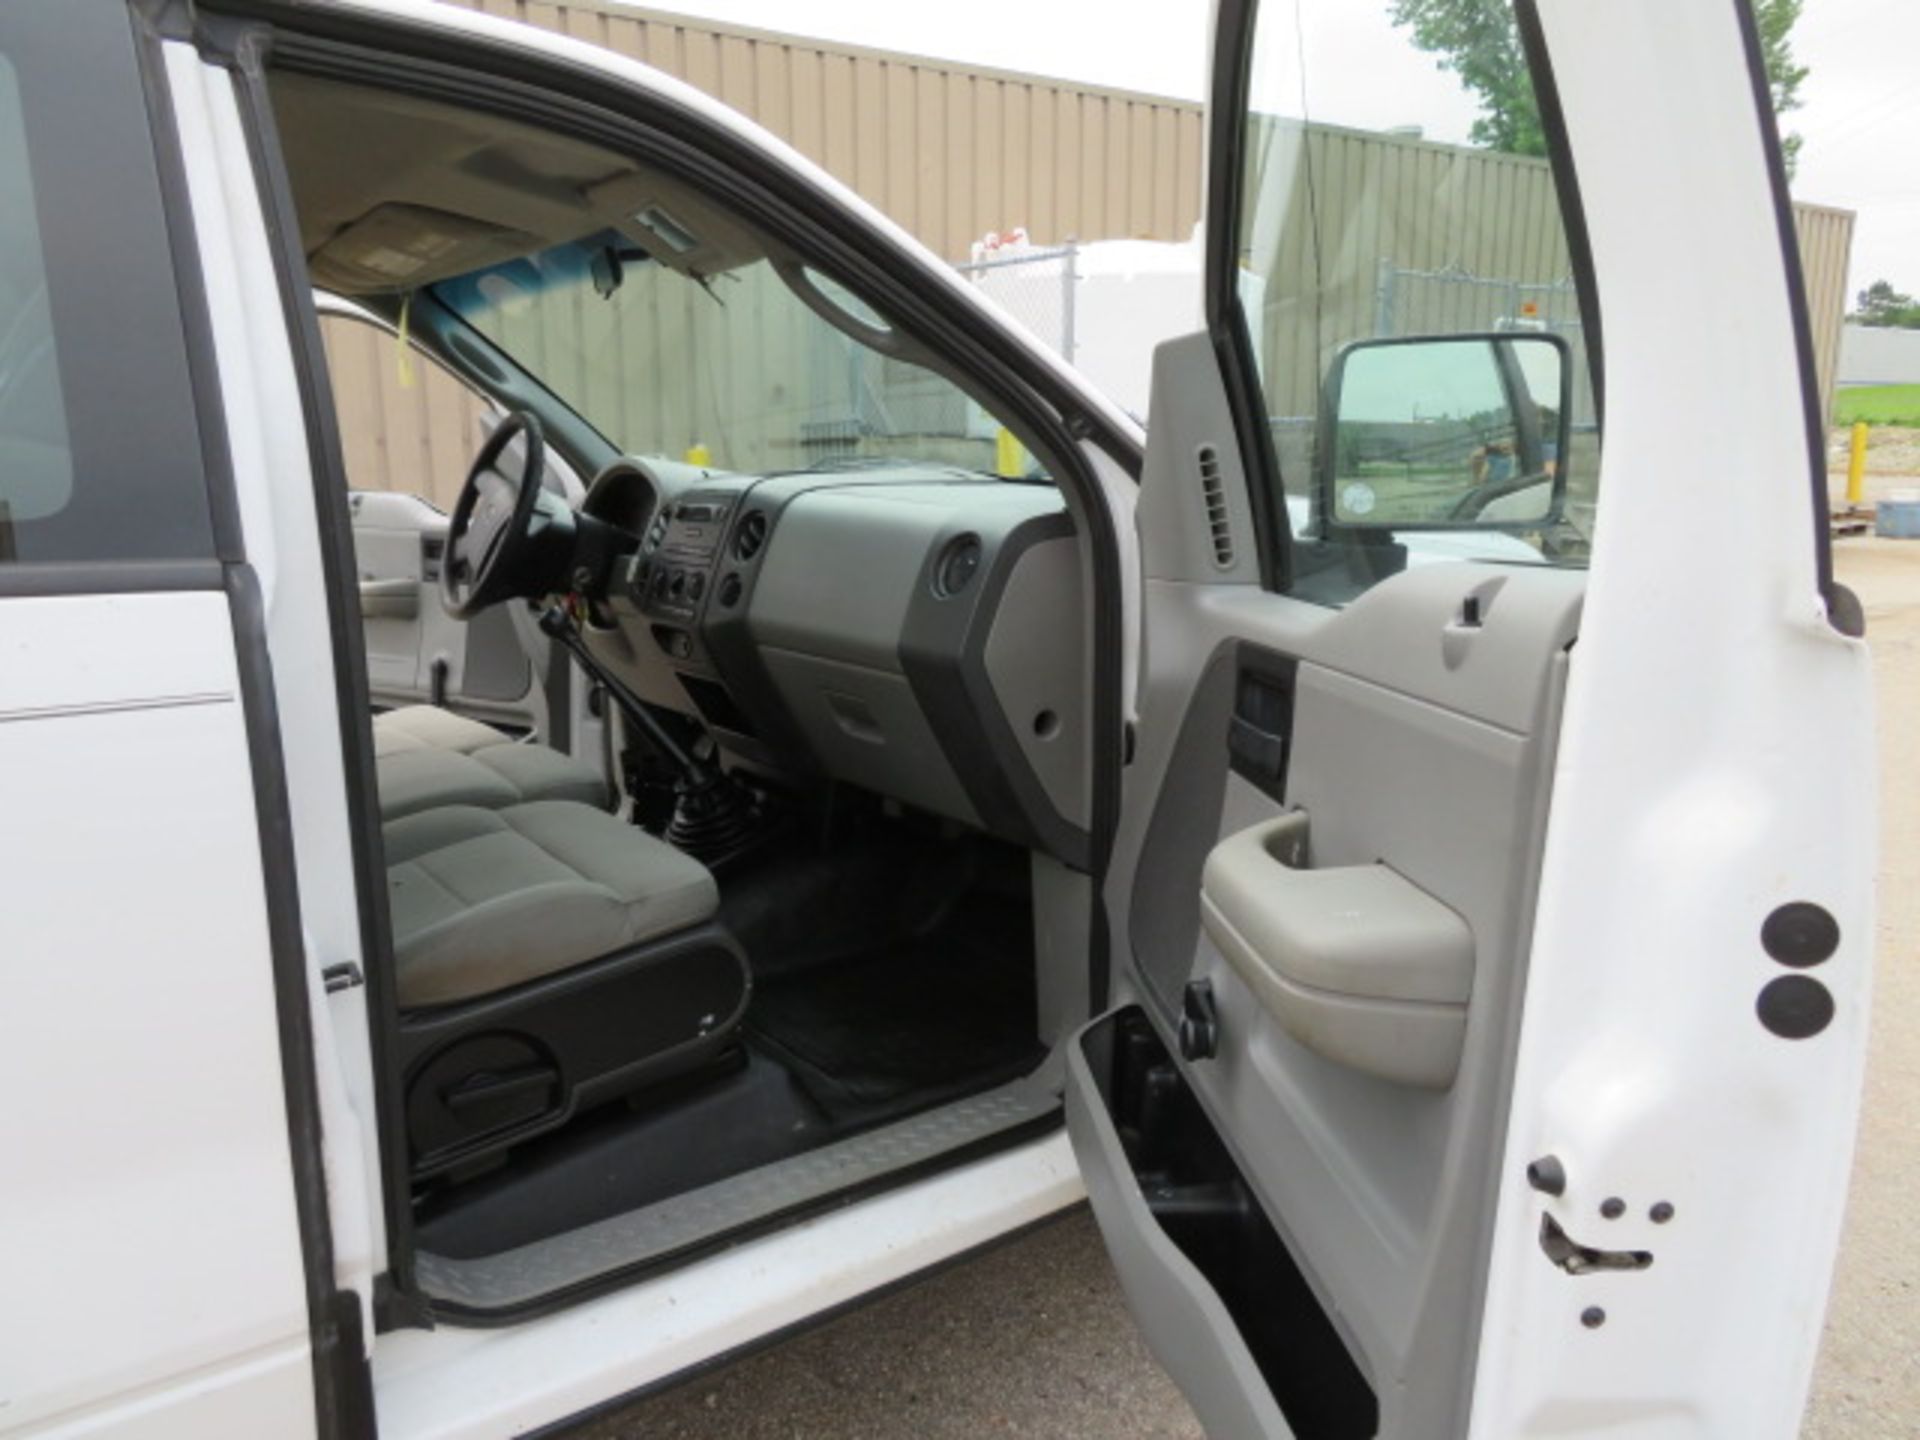 PICKUP TRUCK, 2008 FORD F-150 XL, 5 spd. manual trans., 60/40 bench seat, 6' bed w/Pendaliner bed - Image 6 of 6